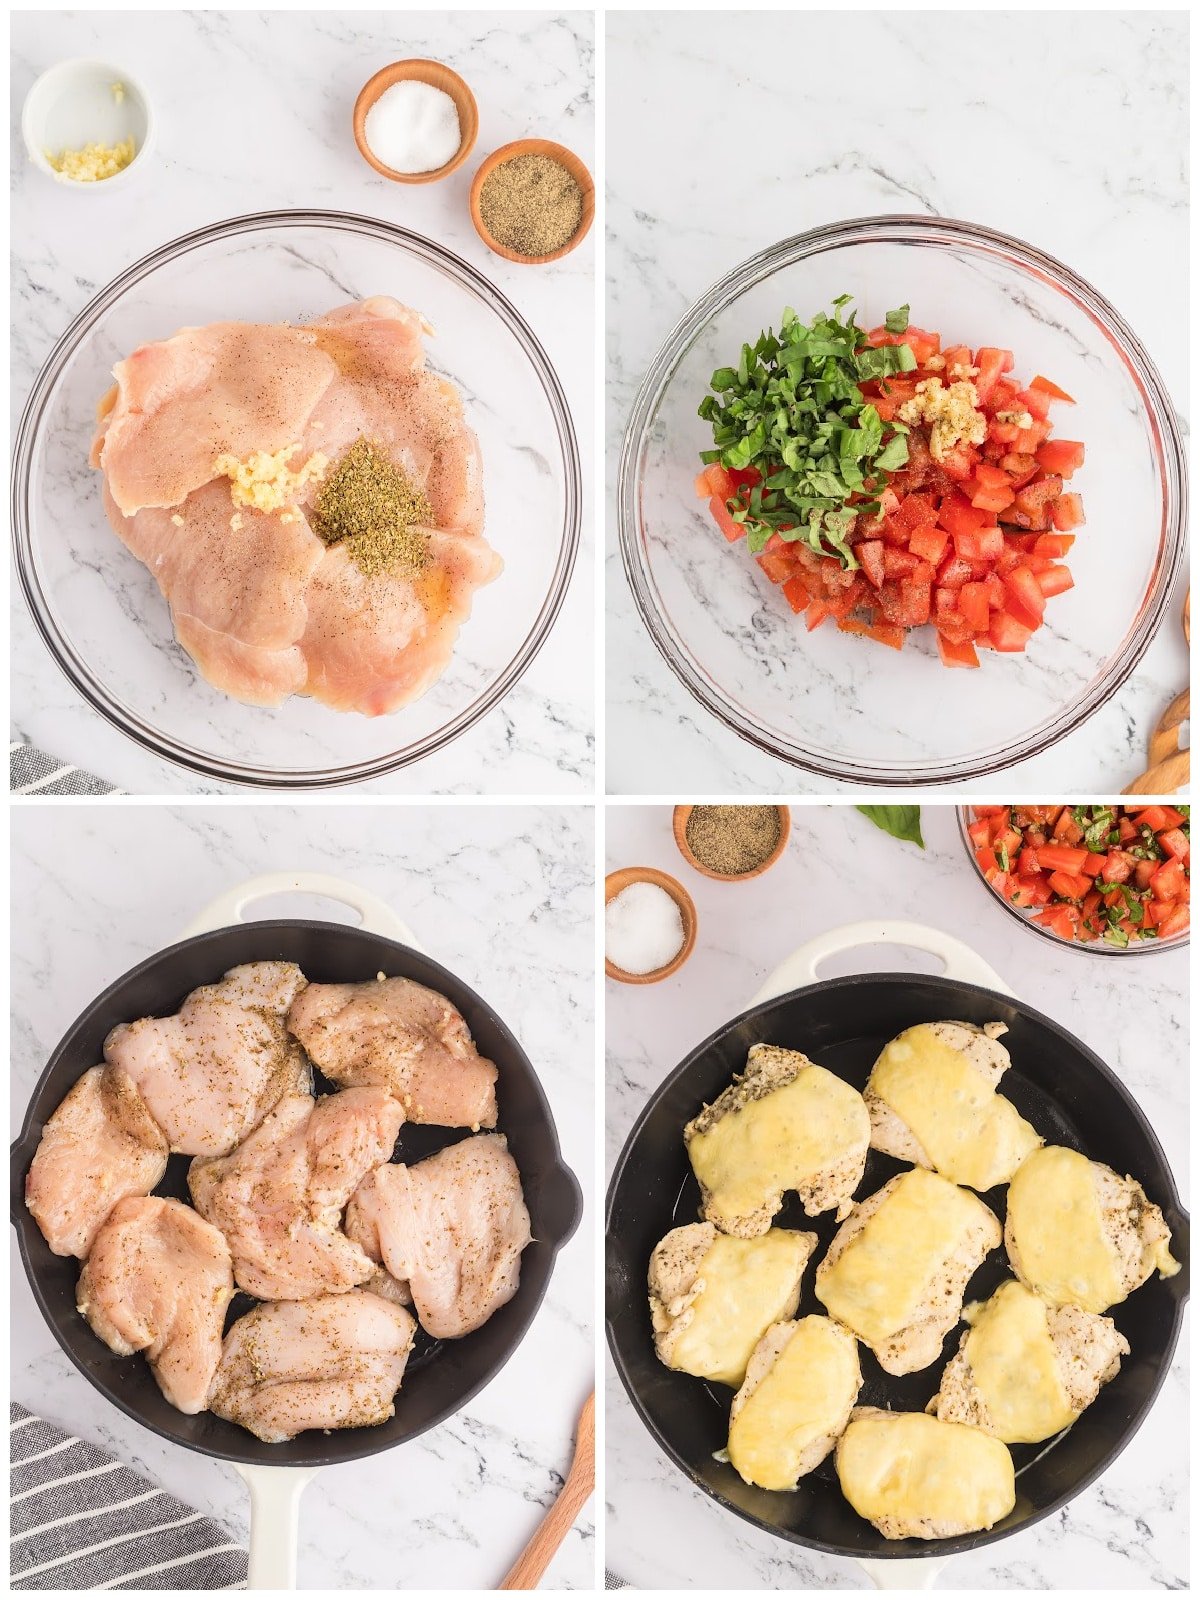 A collage of four images showing how to make the chicken recipe.